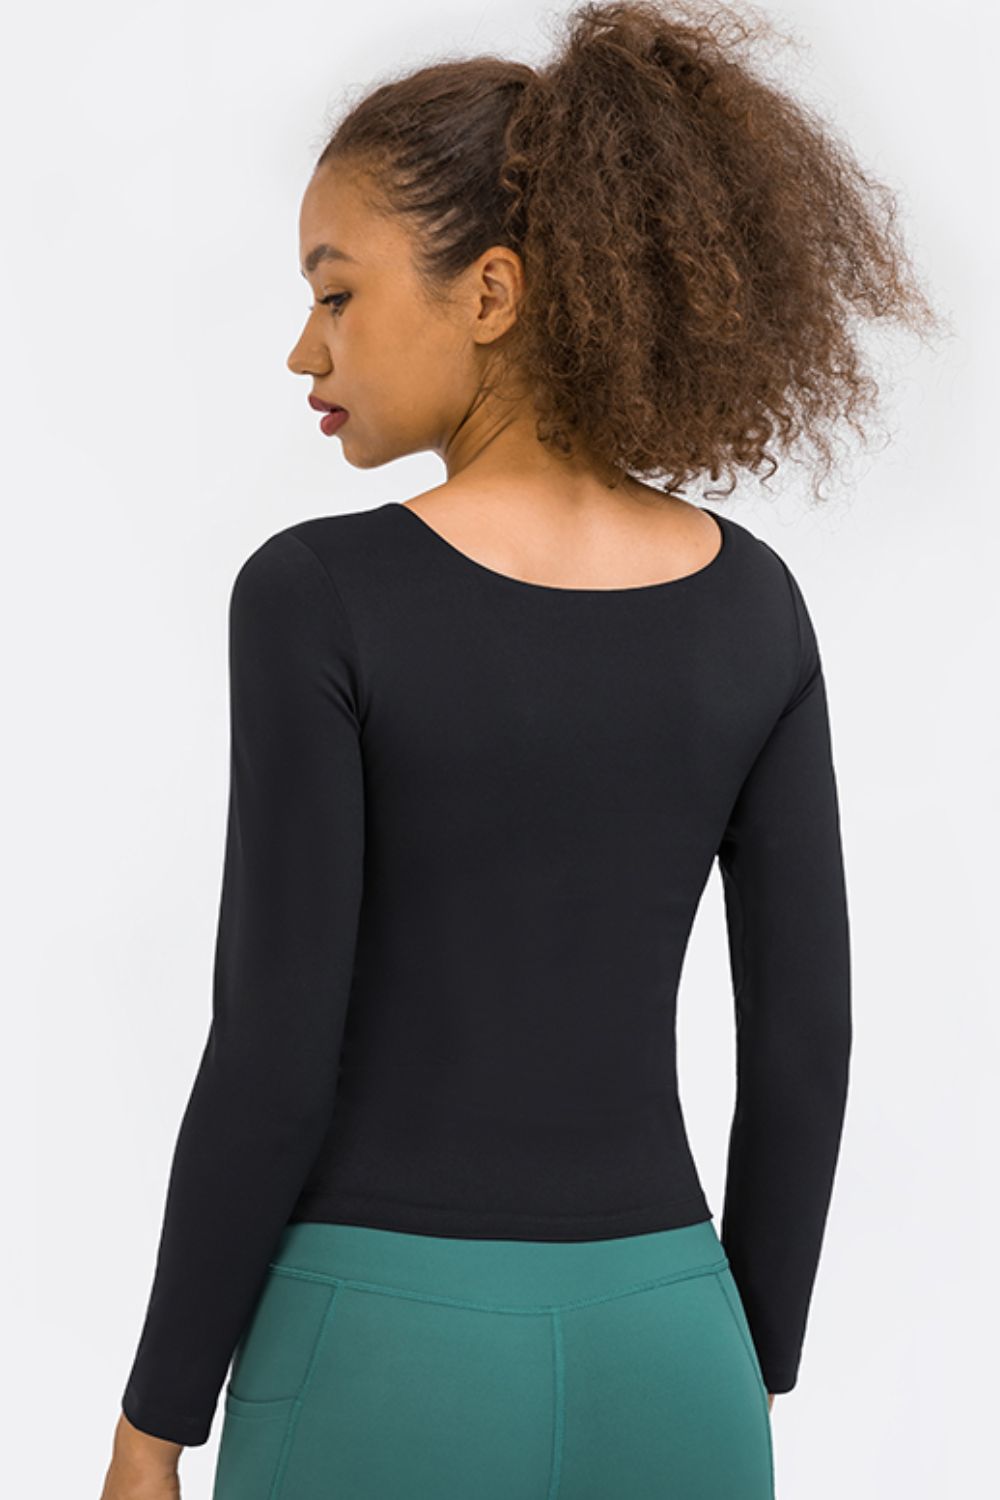 Women’s Feel Like Skin Highly Stretchy Long Sleeve Sports Top